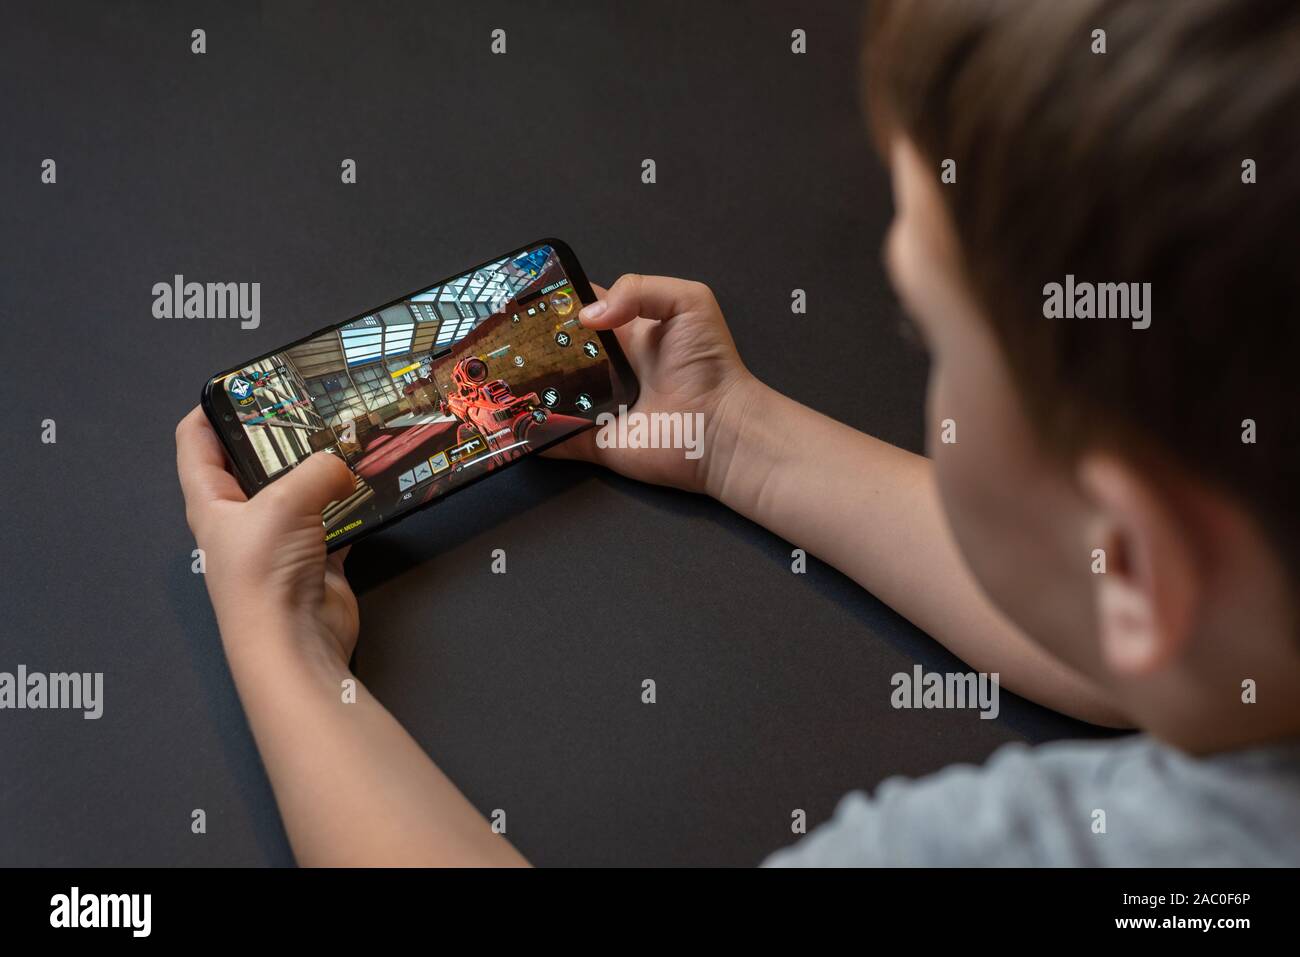 Sarajevo, Bosnia and Herzegovina - November 29, 2019: Call of Duty: Mobile first-person shooter game on modern smart hone in kid hands Stock Photo